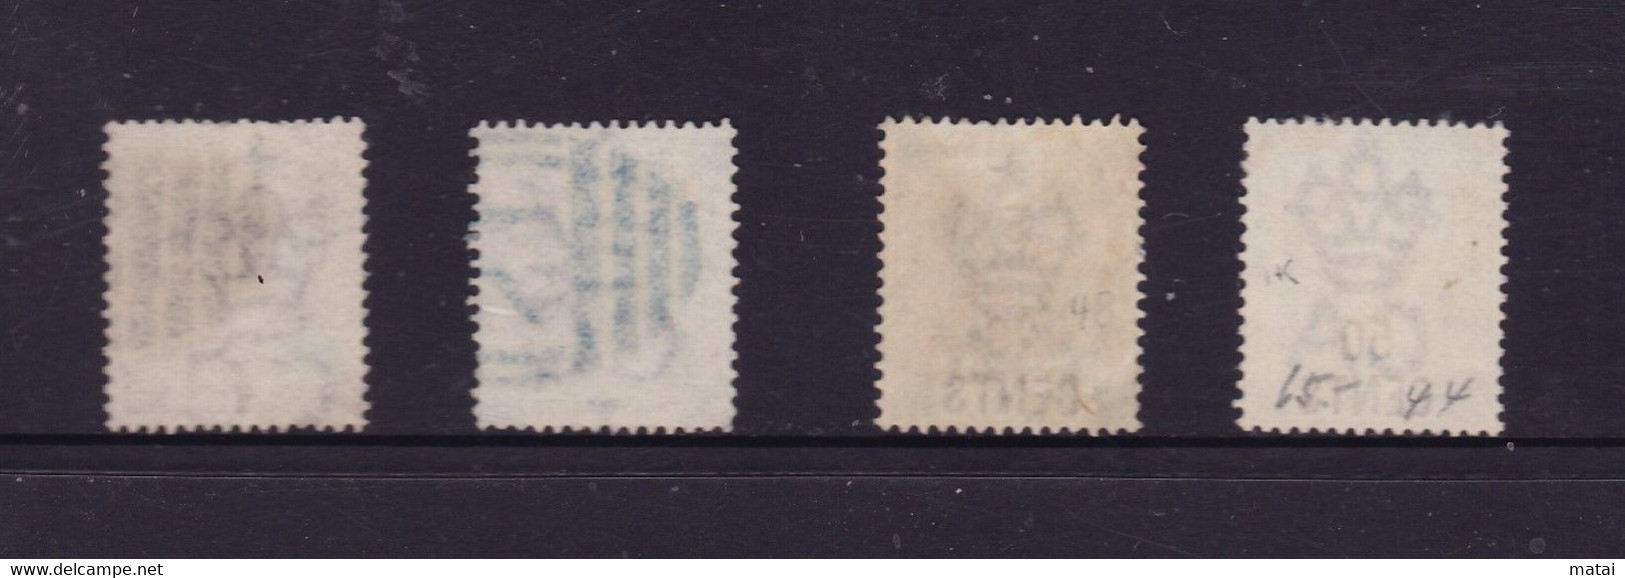 HONG KONG 2 C. + 12 C. ，  20 CENTS On 30 C, 50 CENTS On 48 C., Both Cancelled, Vf, Ovpr. With Chinese Caracters Also - 1941-45 Occupazione Giapponese